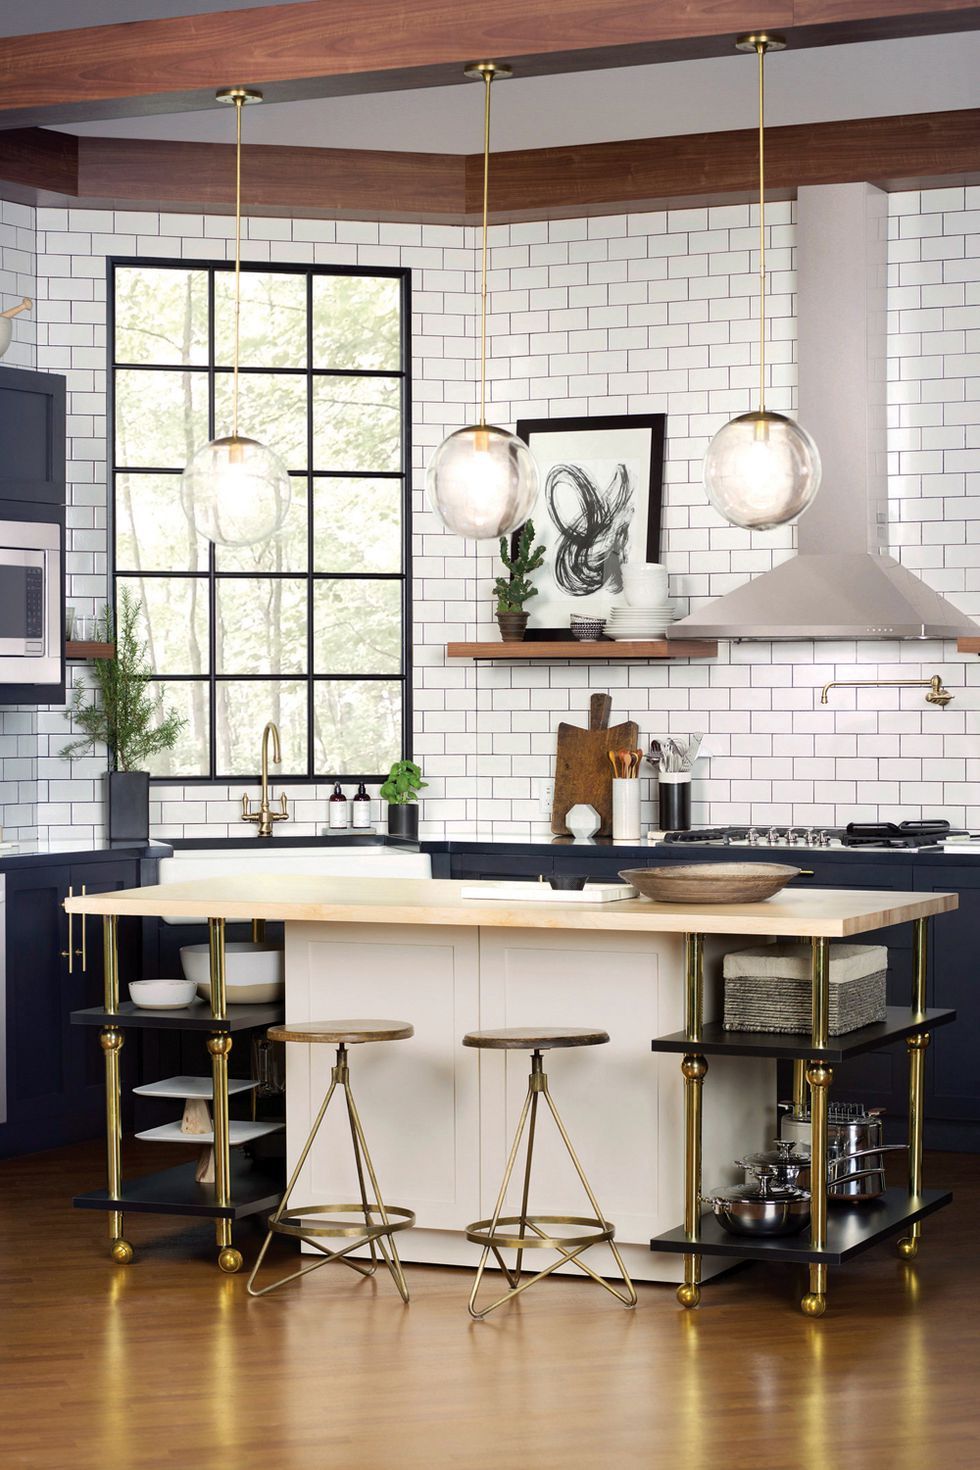 Black and white kitchens: 10 ways with monochrome